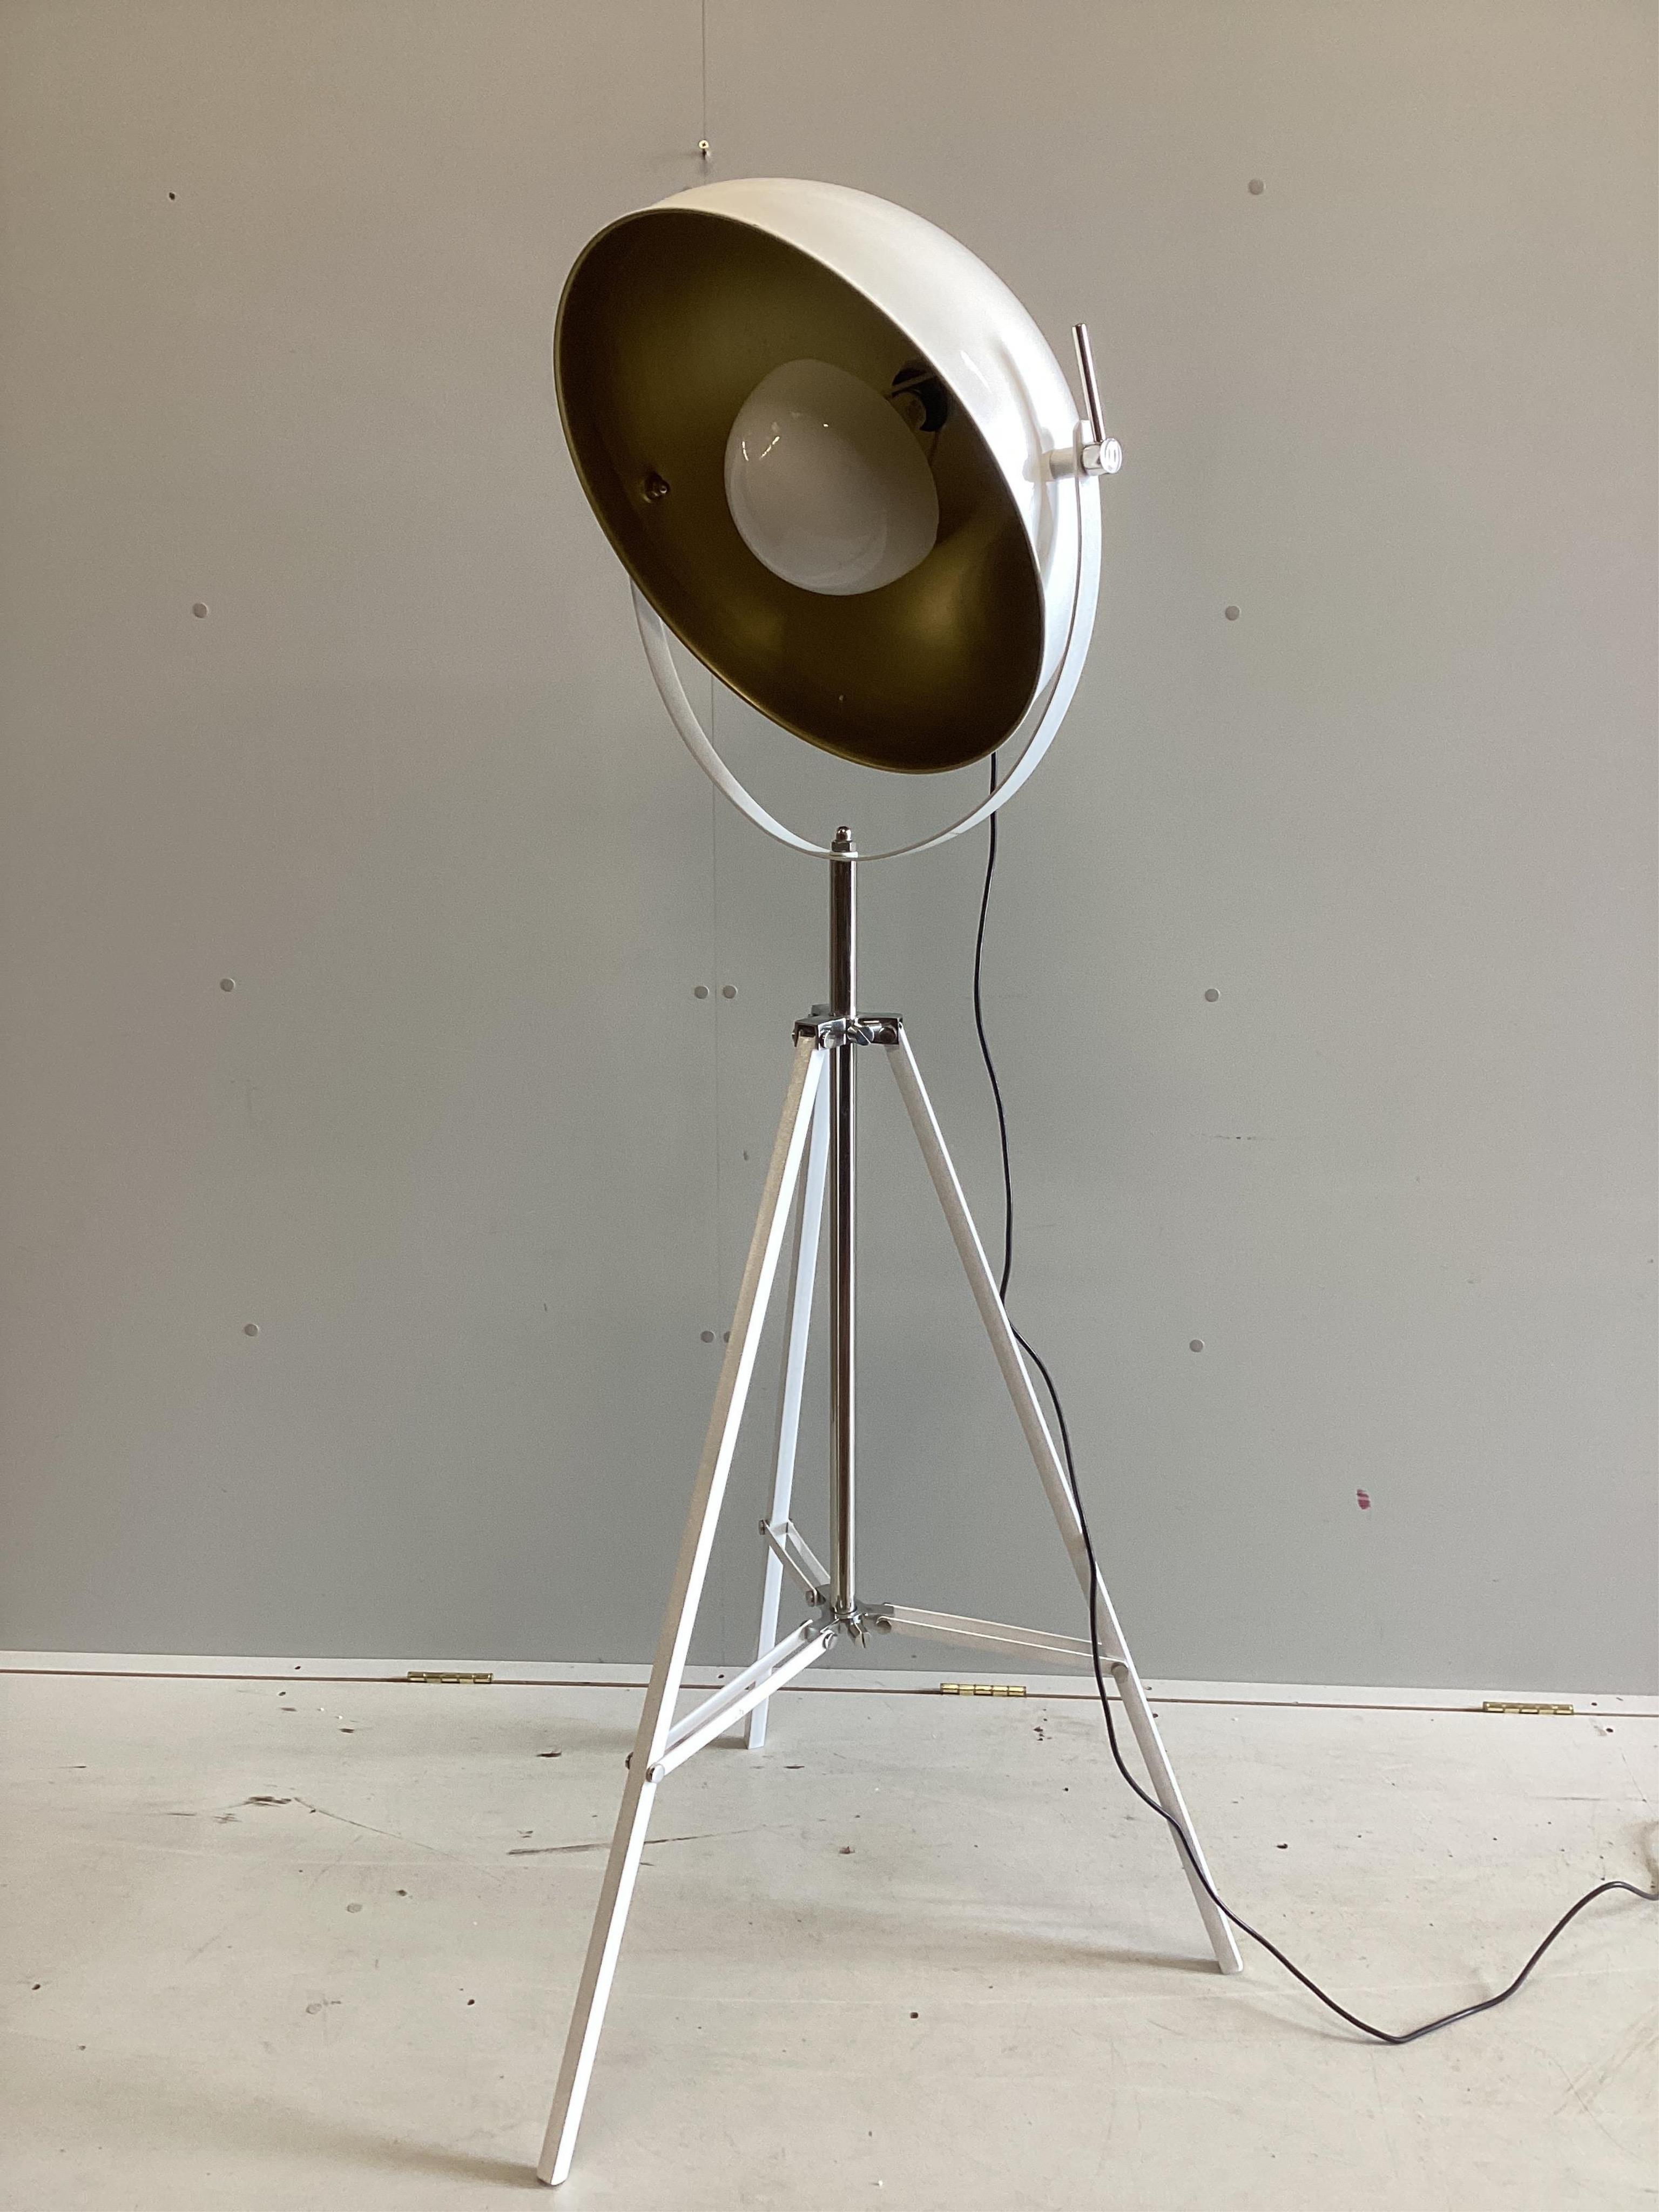 A new Contemporary metal tripod floor lamp with domed shade, height 166cm. Condition - excellent